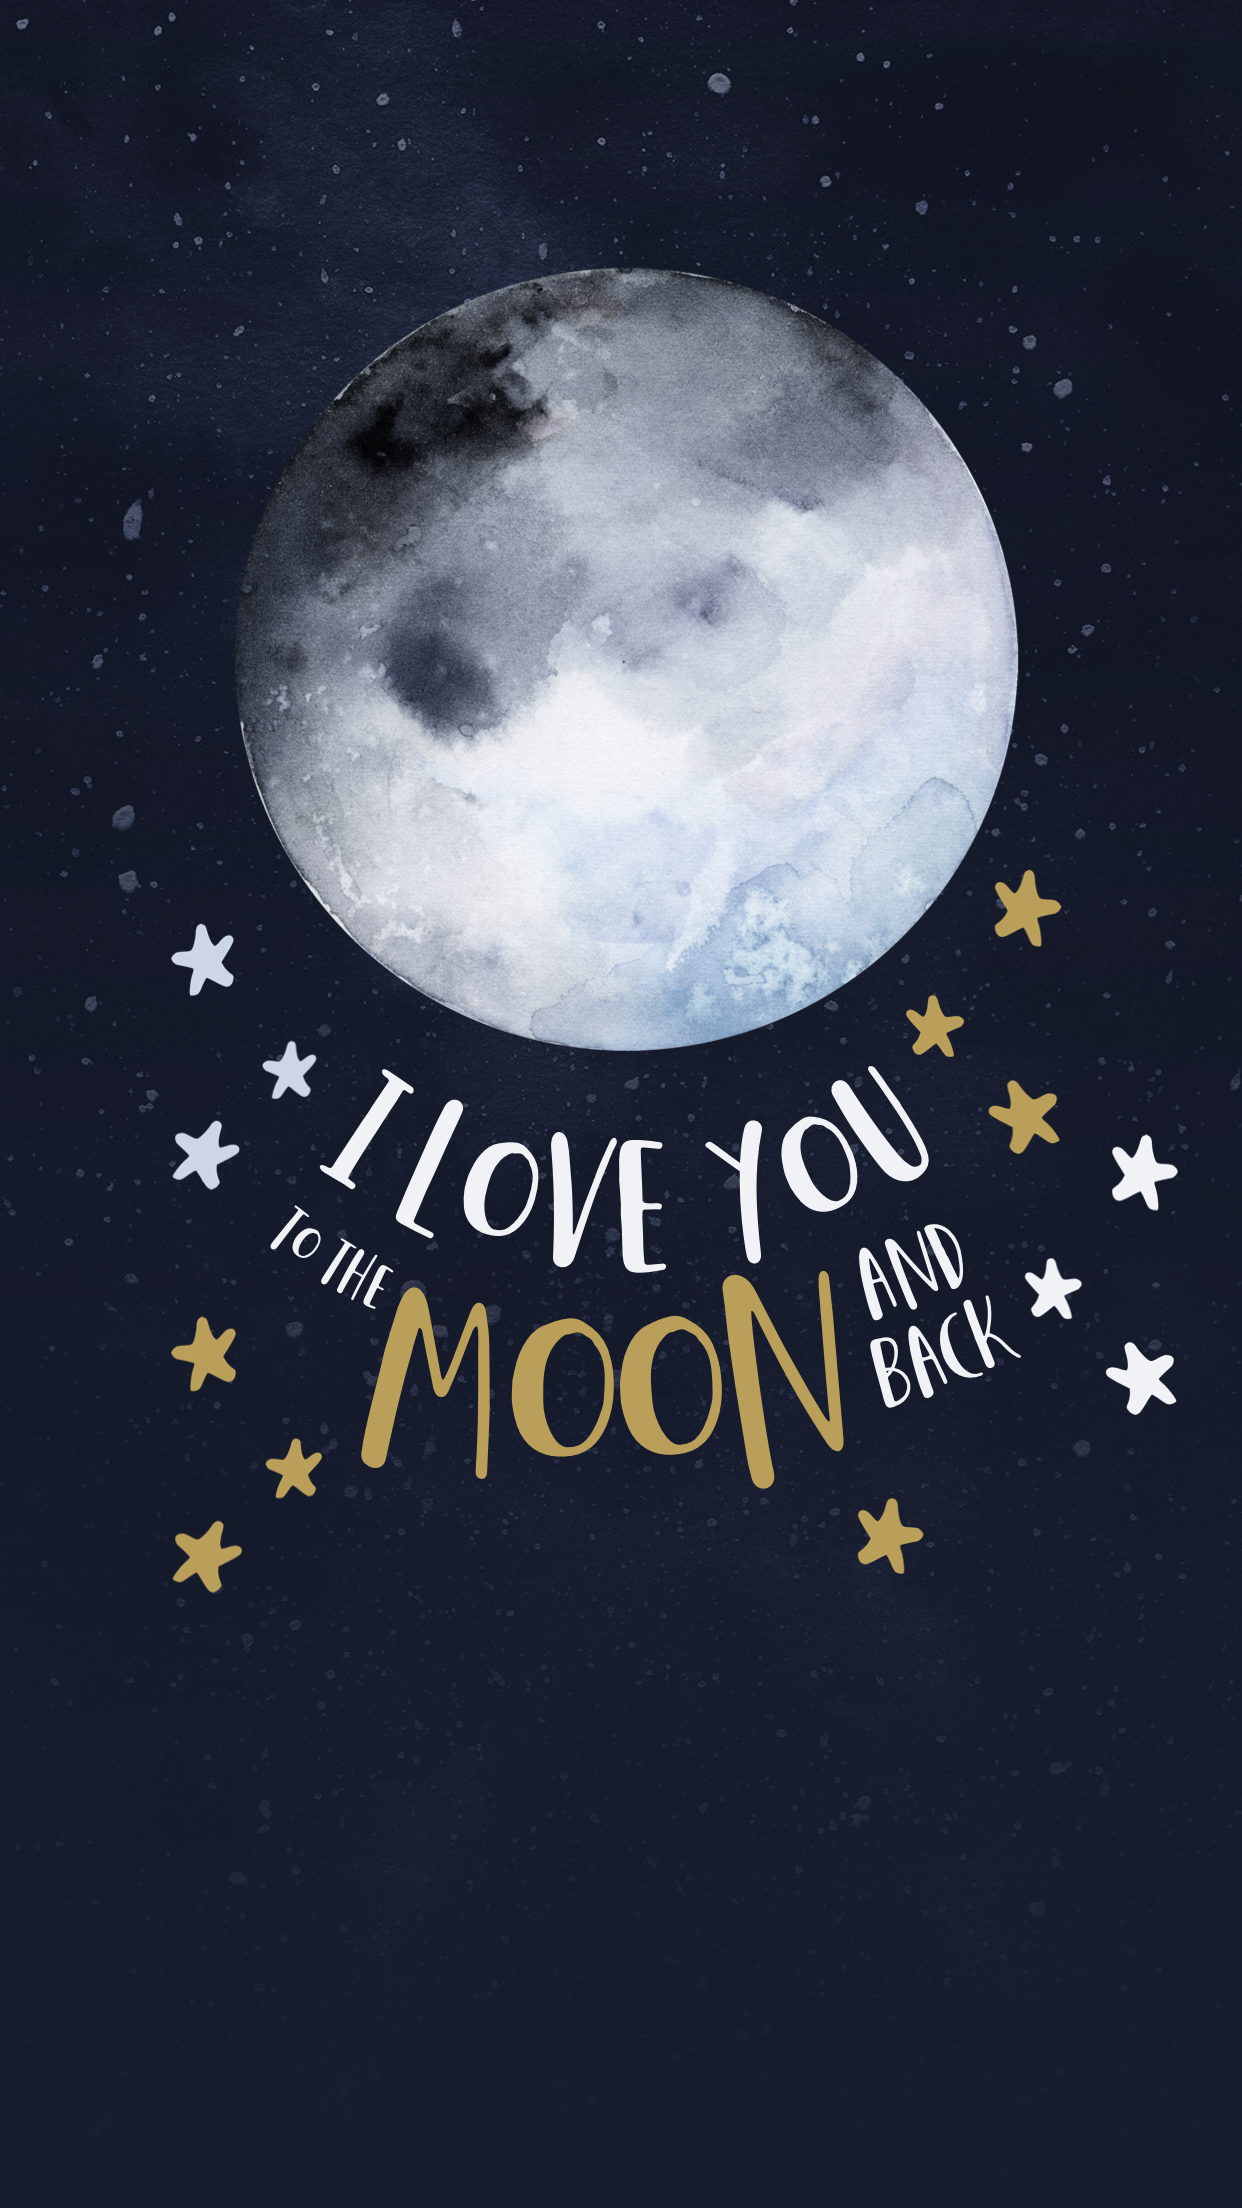 I love you to the moon quote phone wallpaper valentines February Lynn Meadows Photography. Phone wallpaper, Free iphone wallpaper, iPhone wallpaper